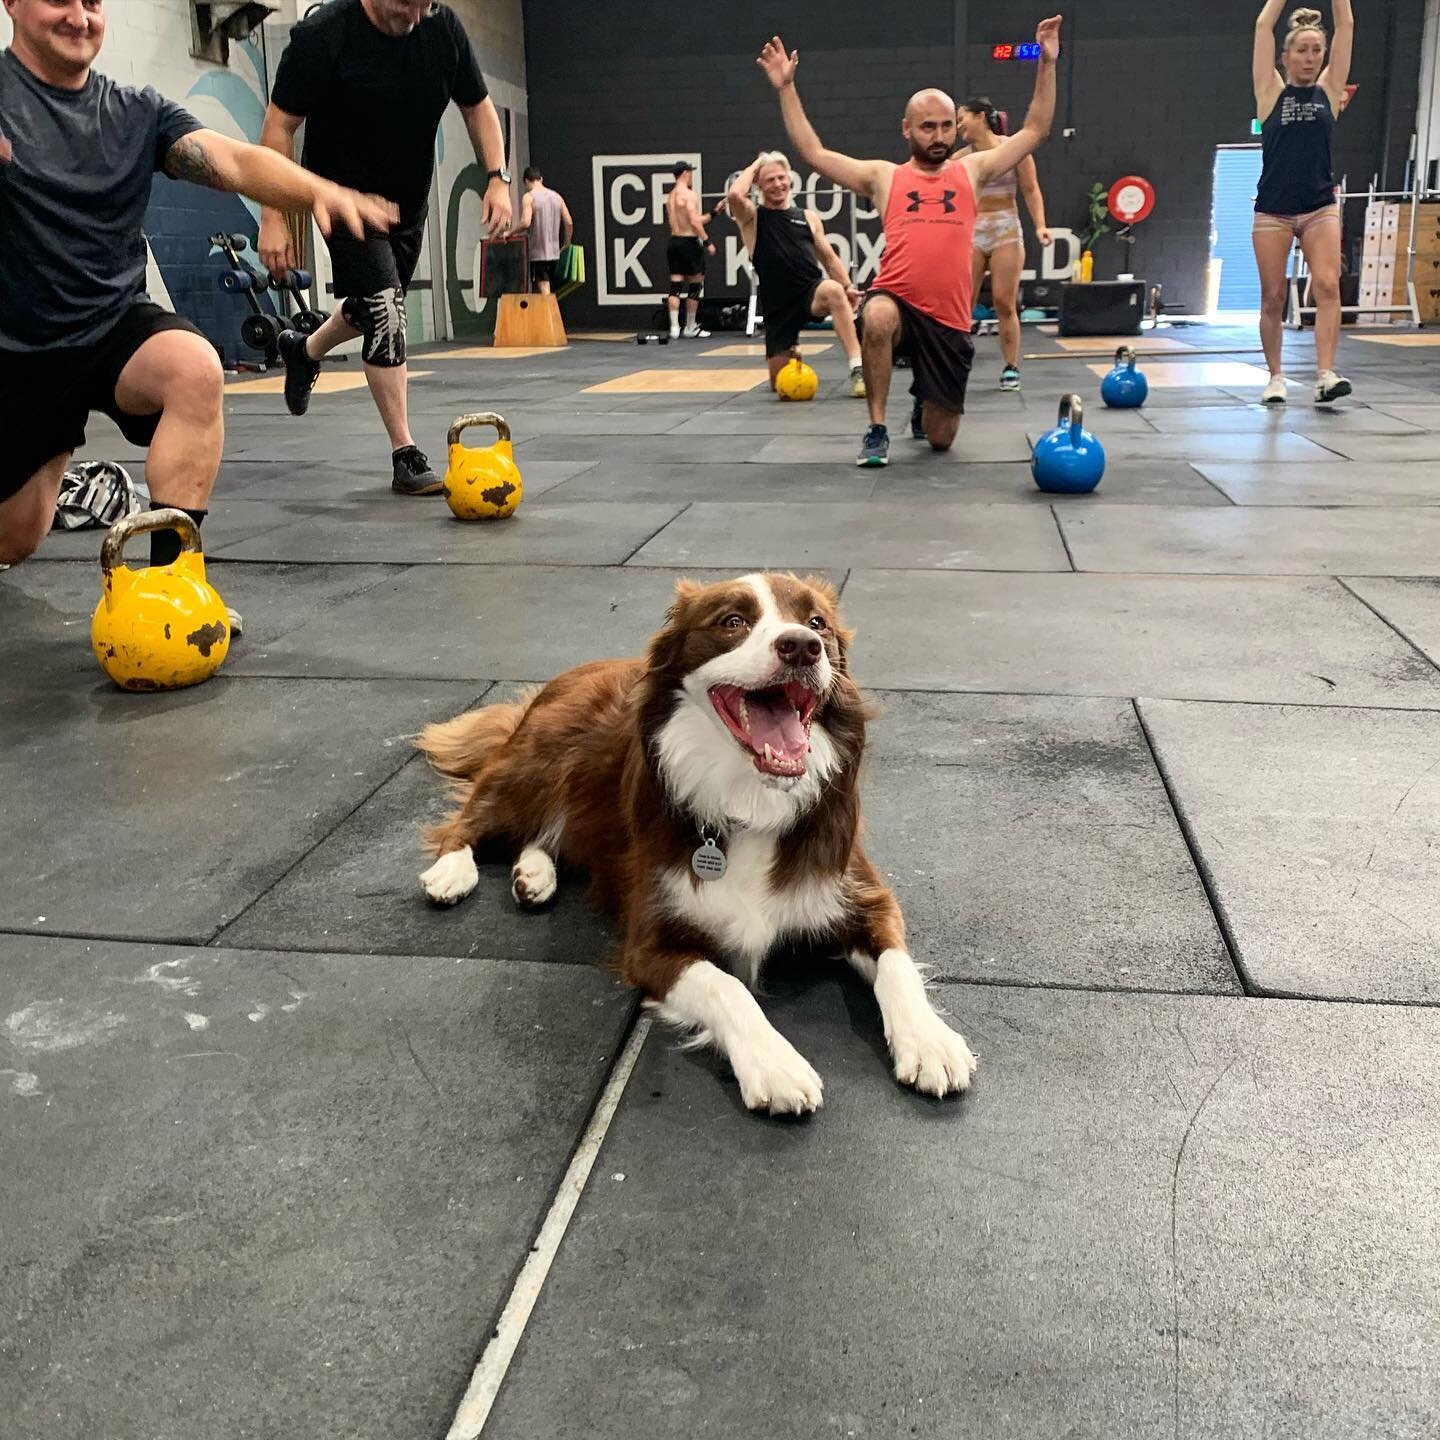 CFK gym mascot @bodhi_the_bordercollie 🐶 💙

Interested in getting started with us? Text CFK to 0401 562 086 to redeem a 14 day free trial 🤙

#CFK #CrossFit #gymdog #loveit